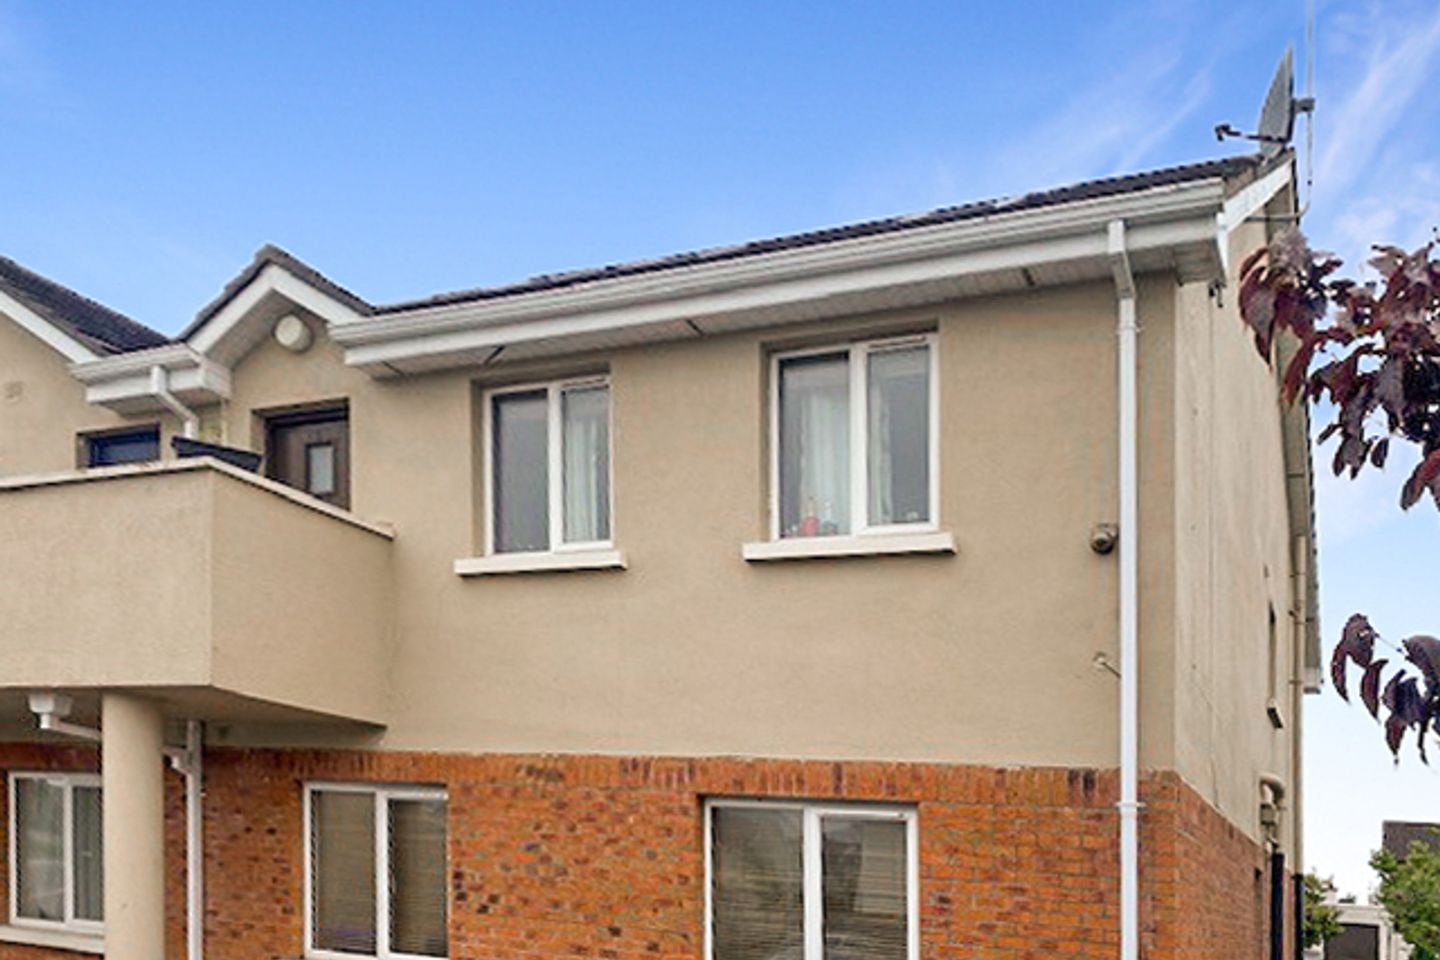 Apartment 4, Coole Haven, Gort, Co. Galway